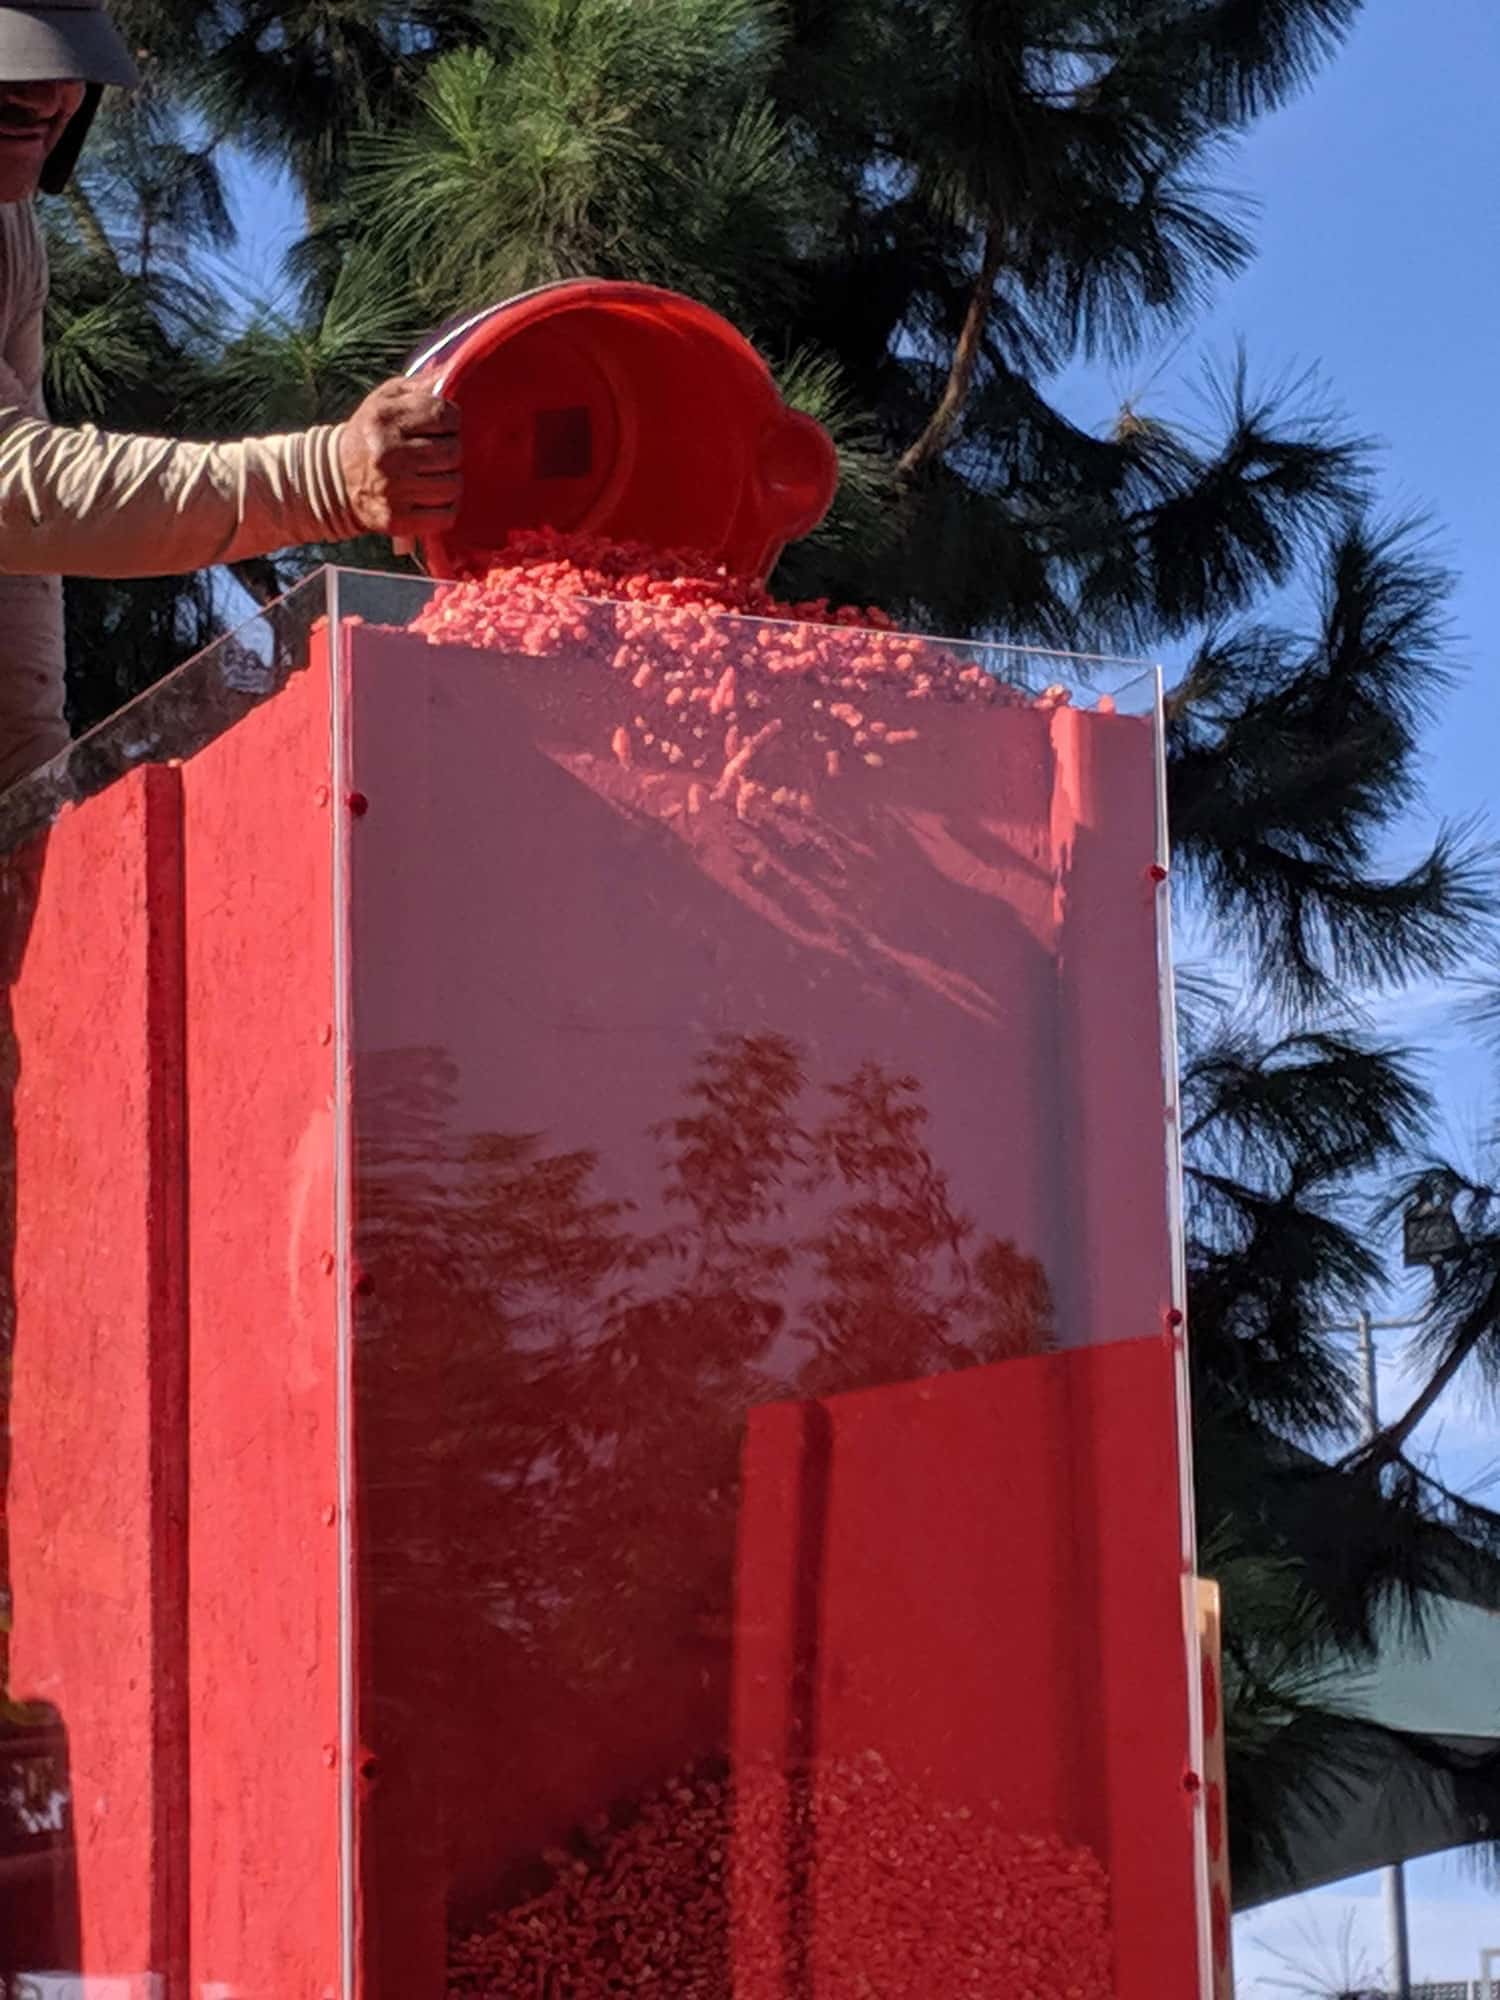 Person's gloved hand pours bucket of Hot Cheetos into large glass structure